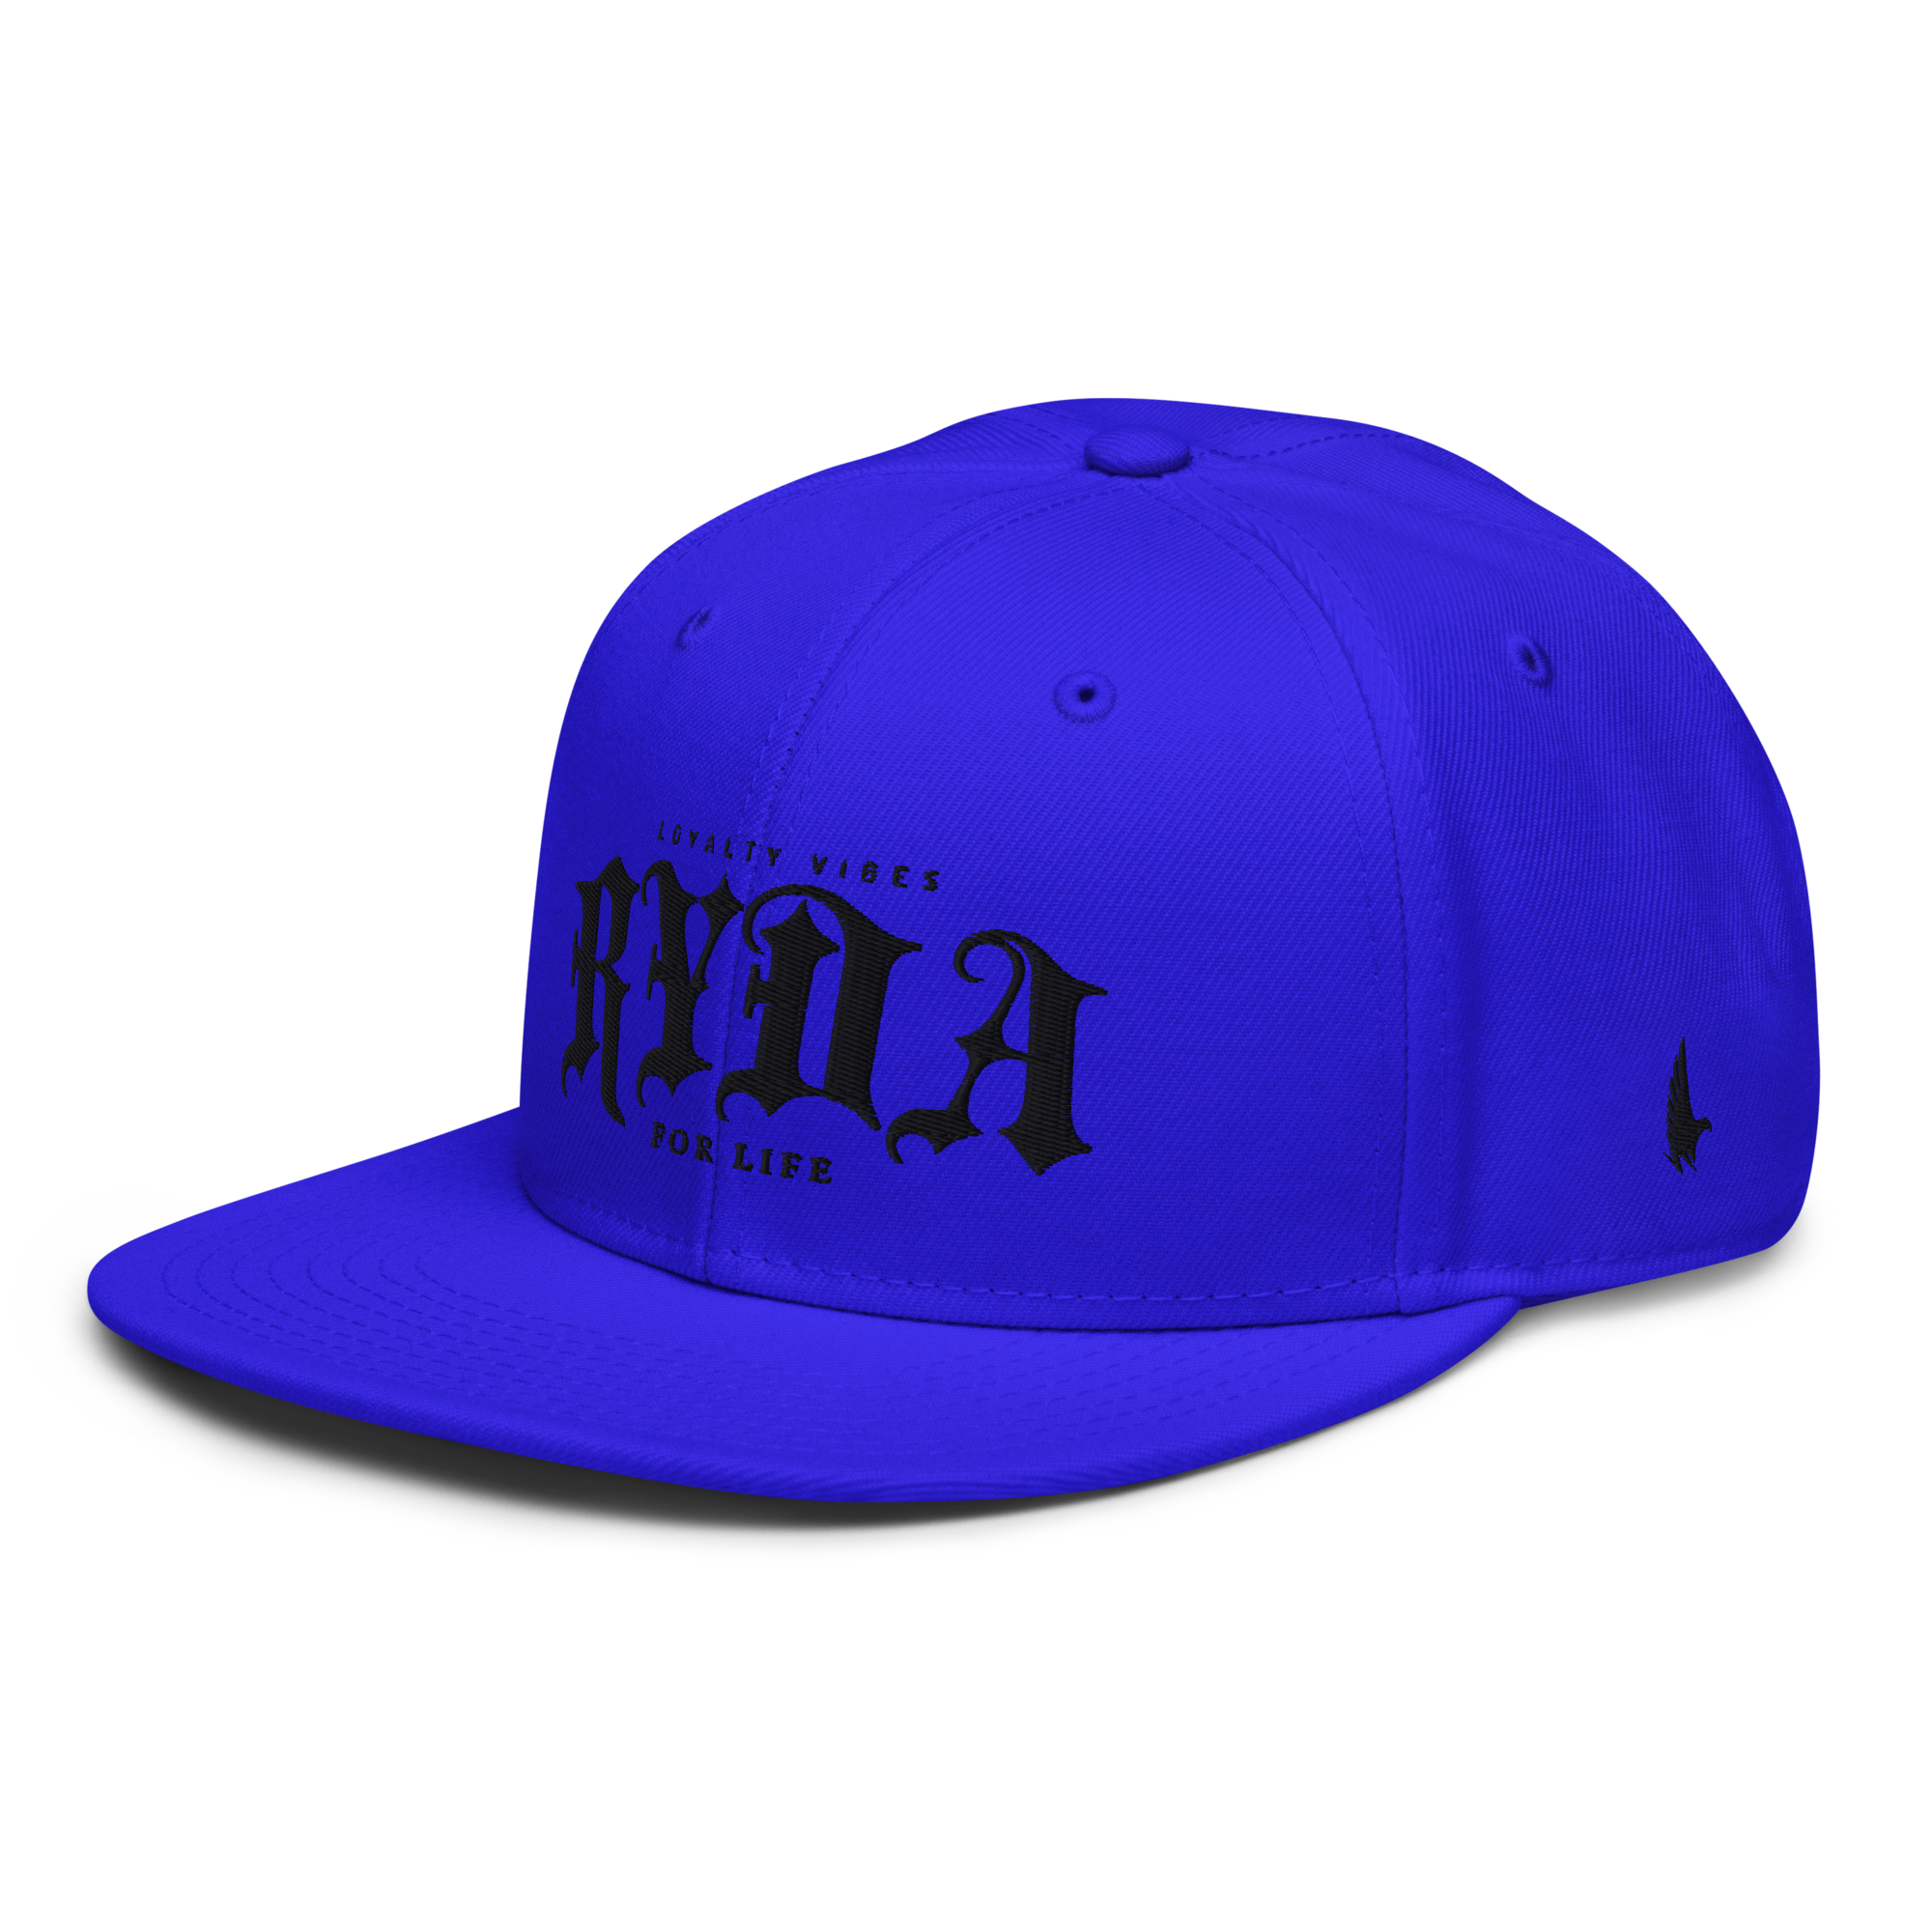 Ryda For Life Snapback Hat - Blue - Loyalty Vibes